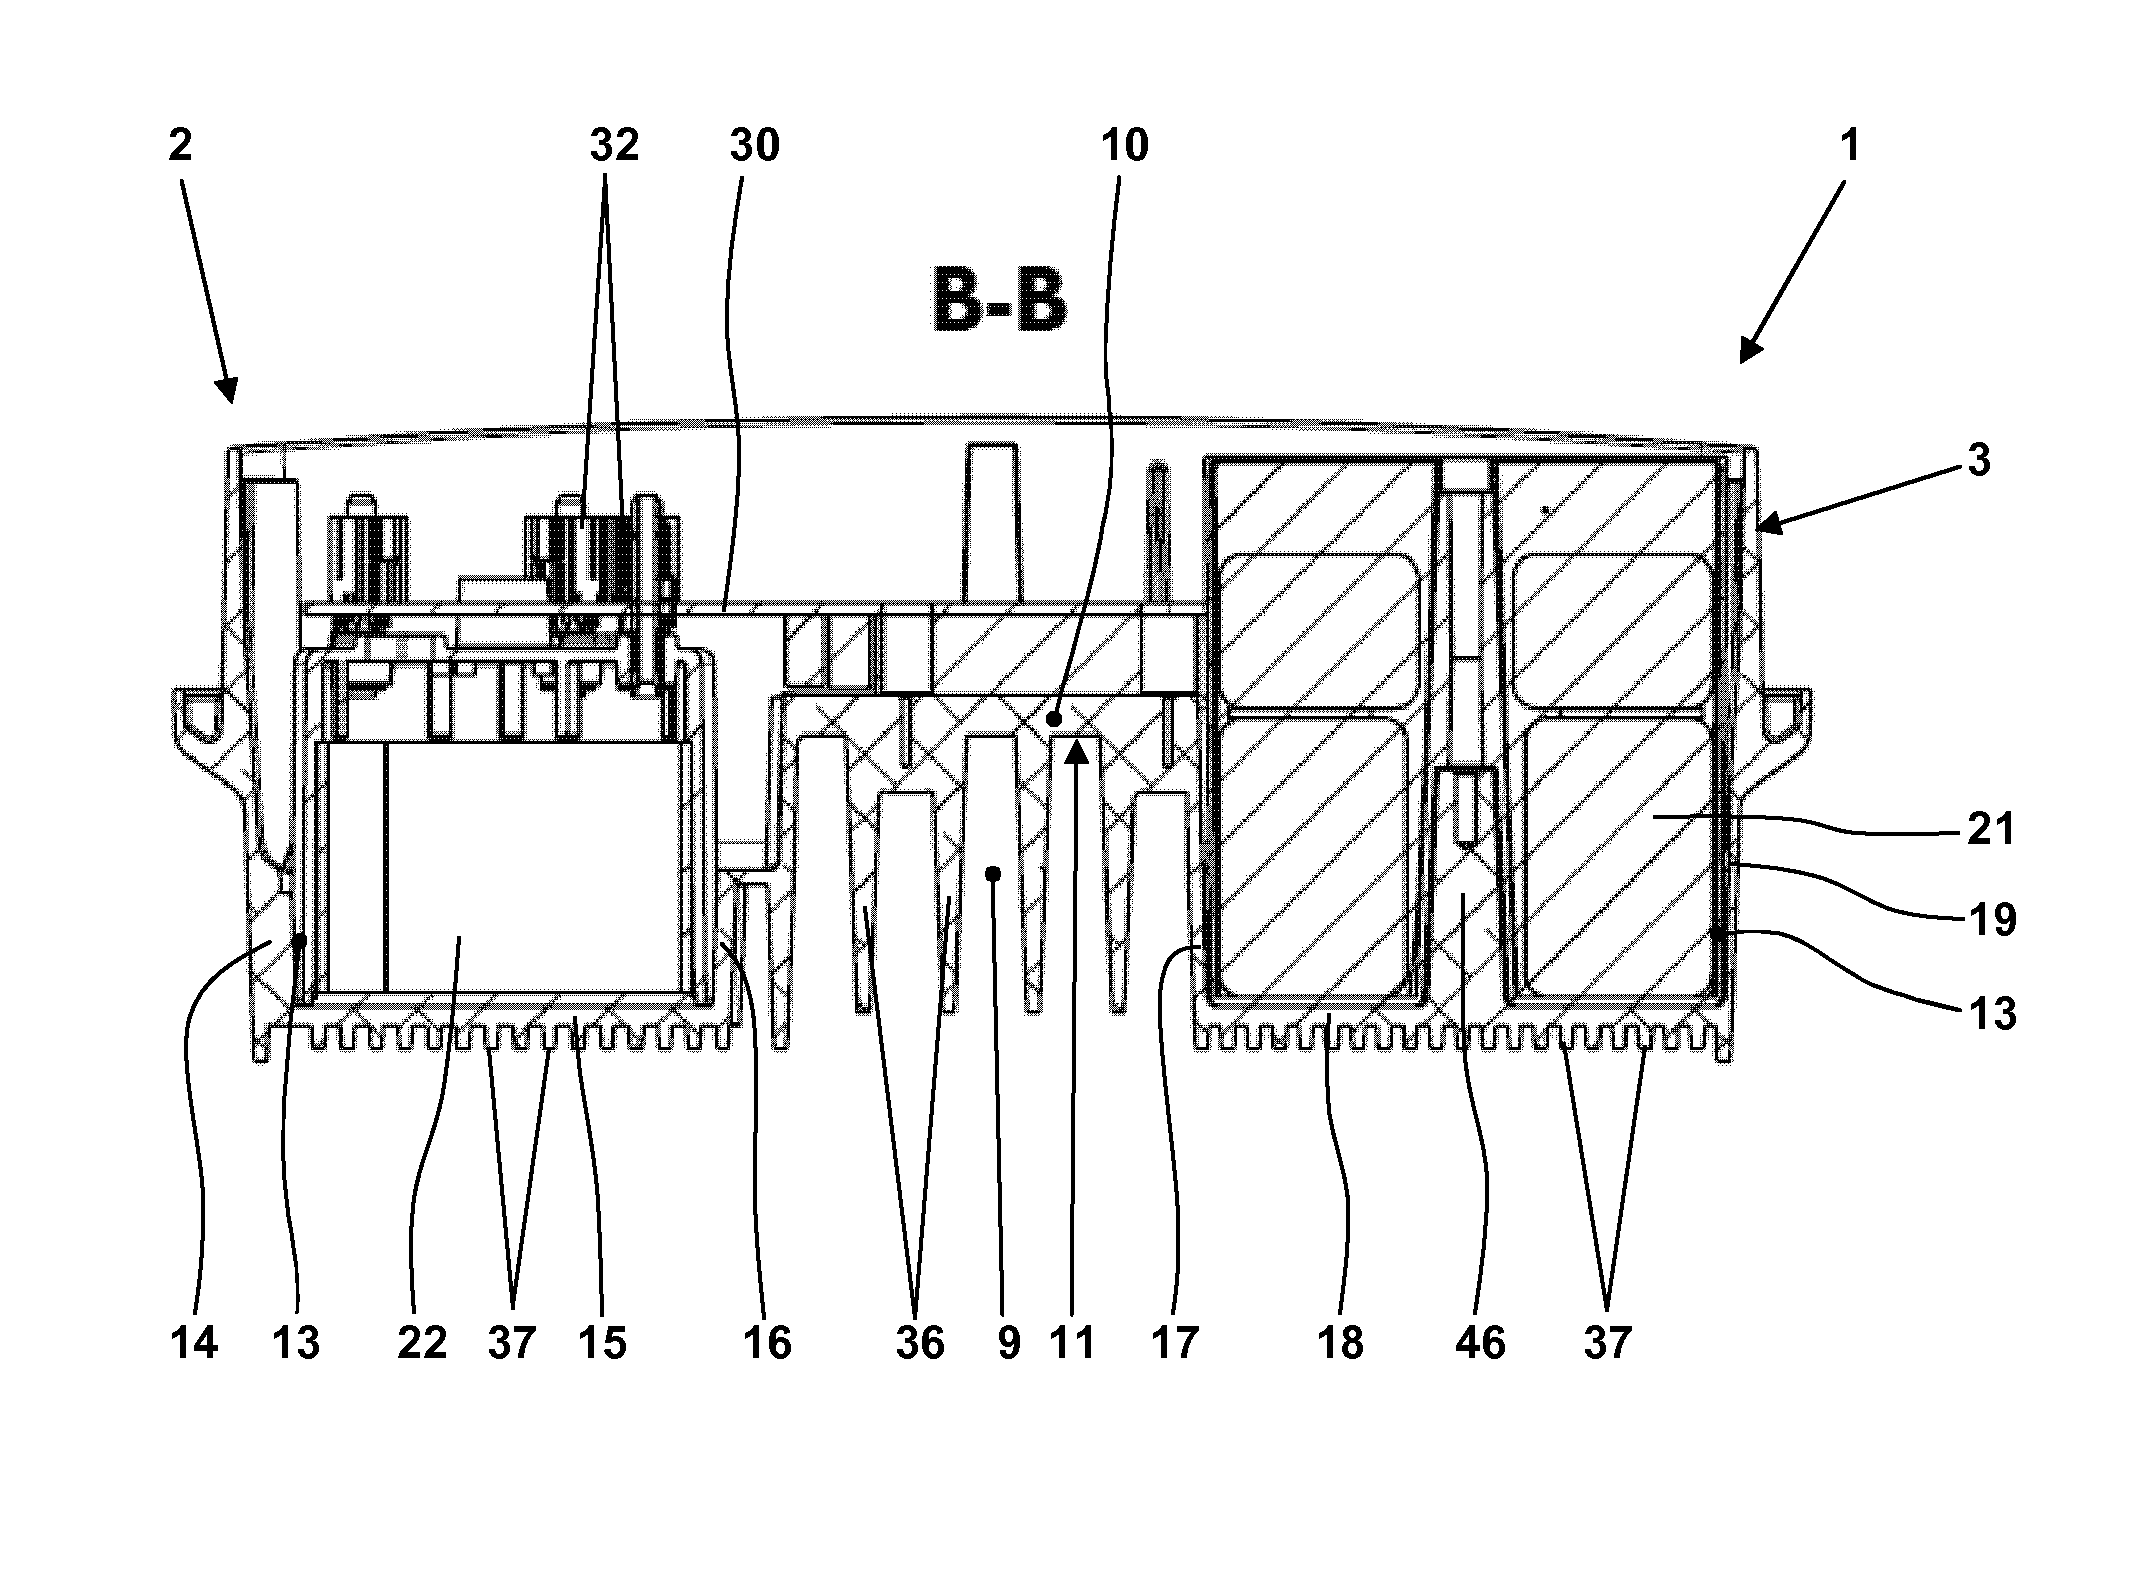 Inverter with electrical and electronic components arranged in a sealed housing